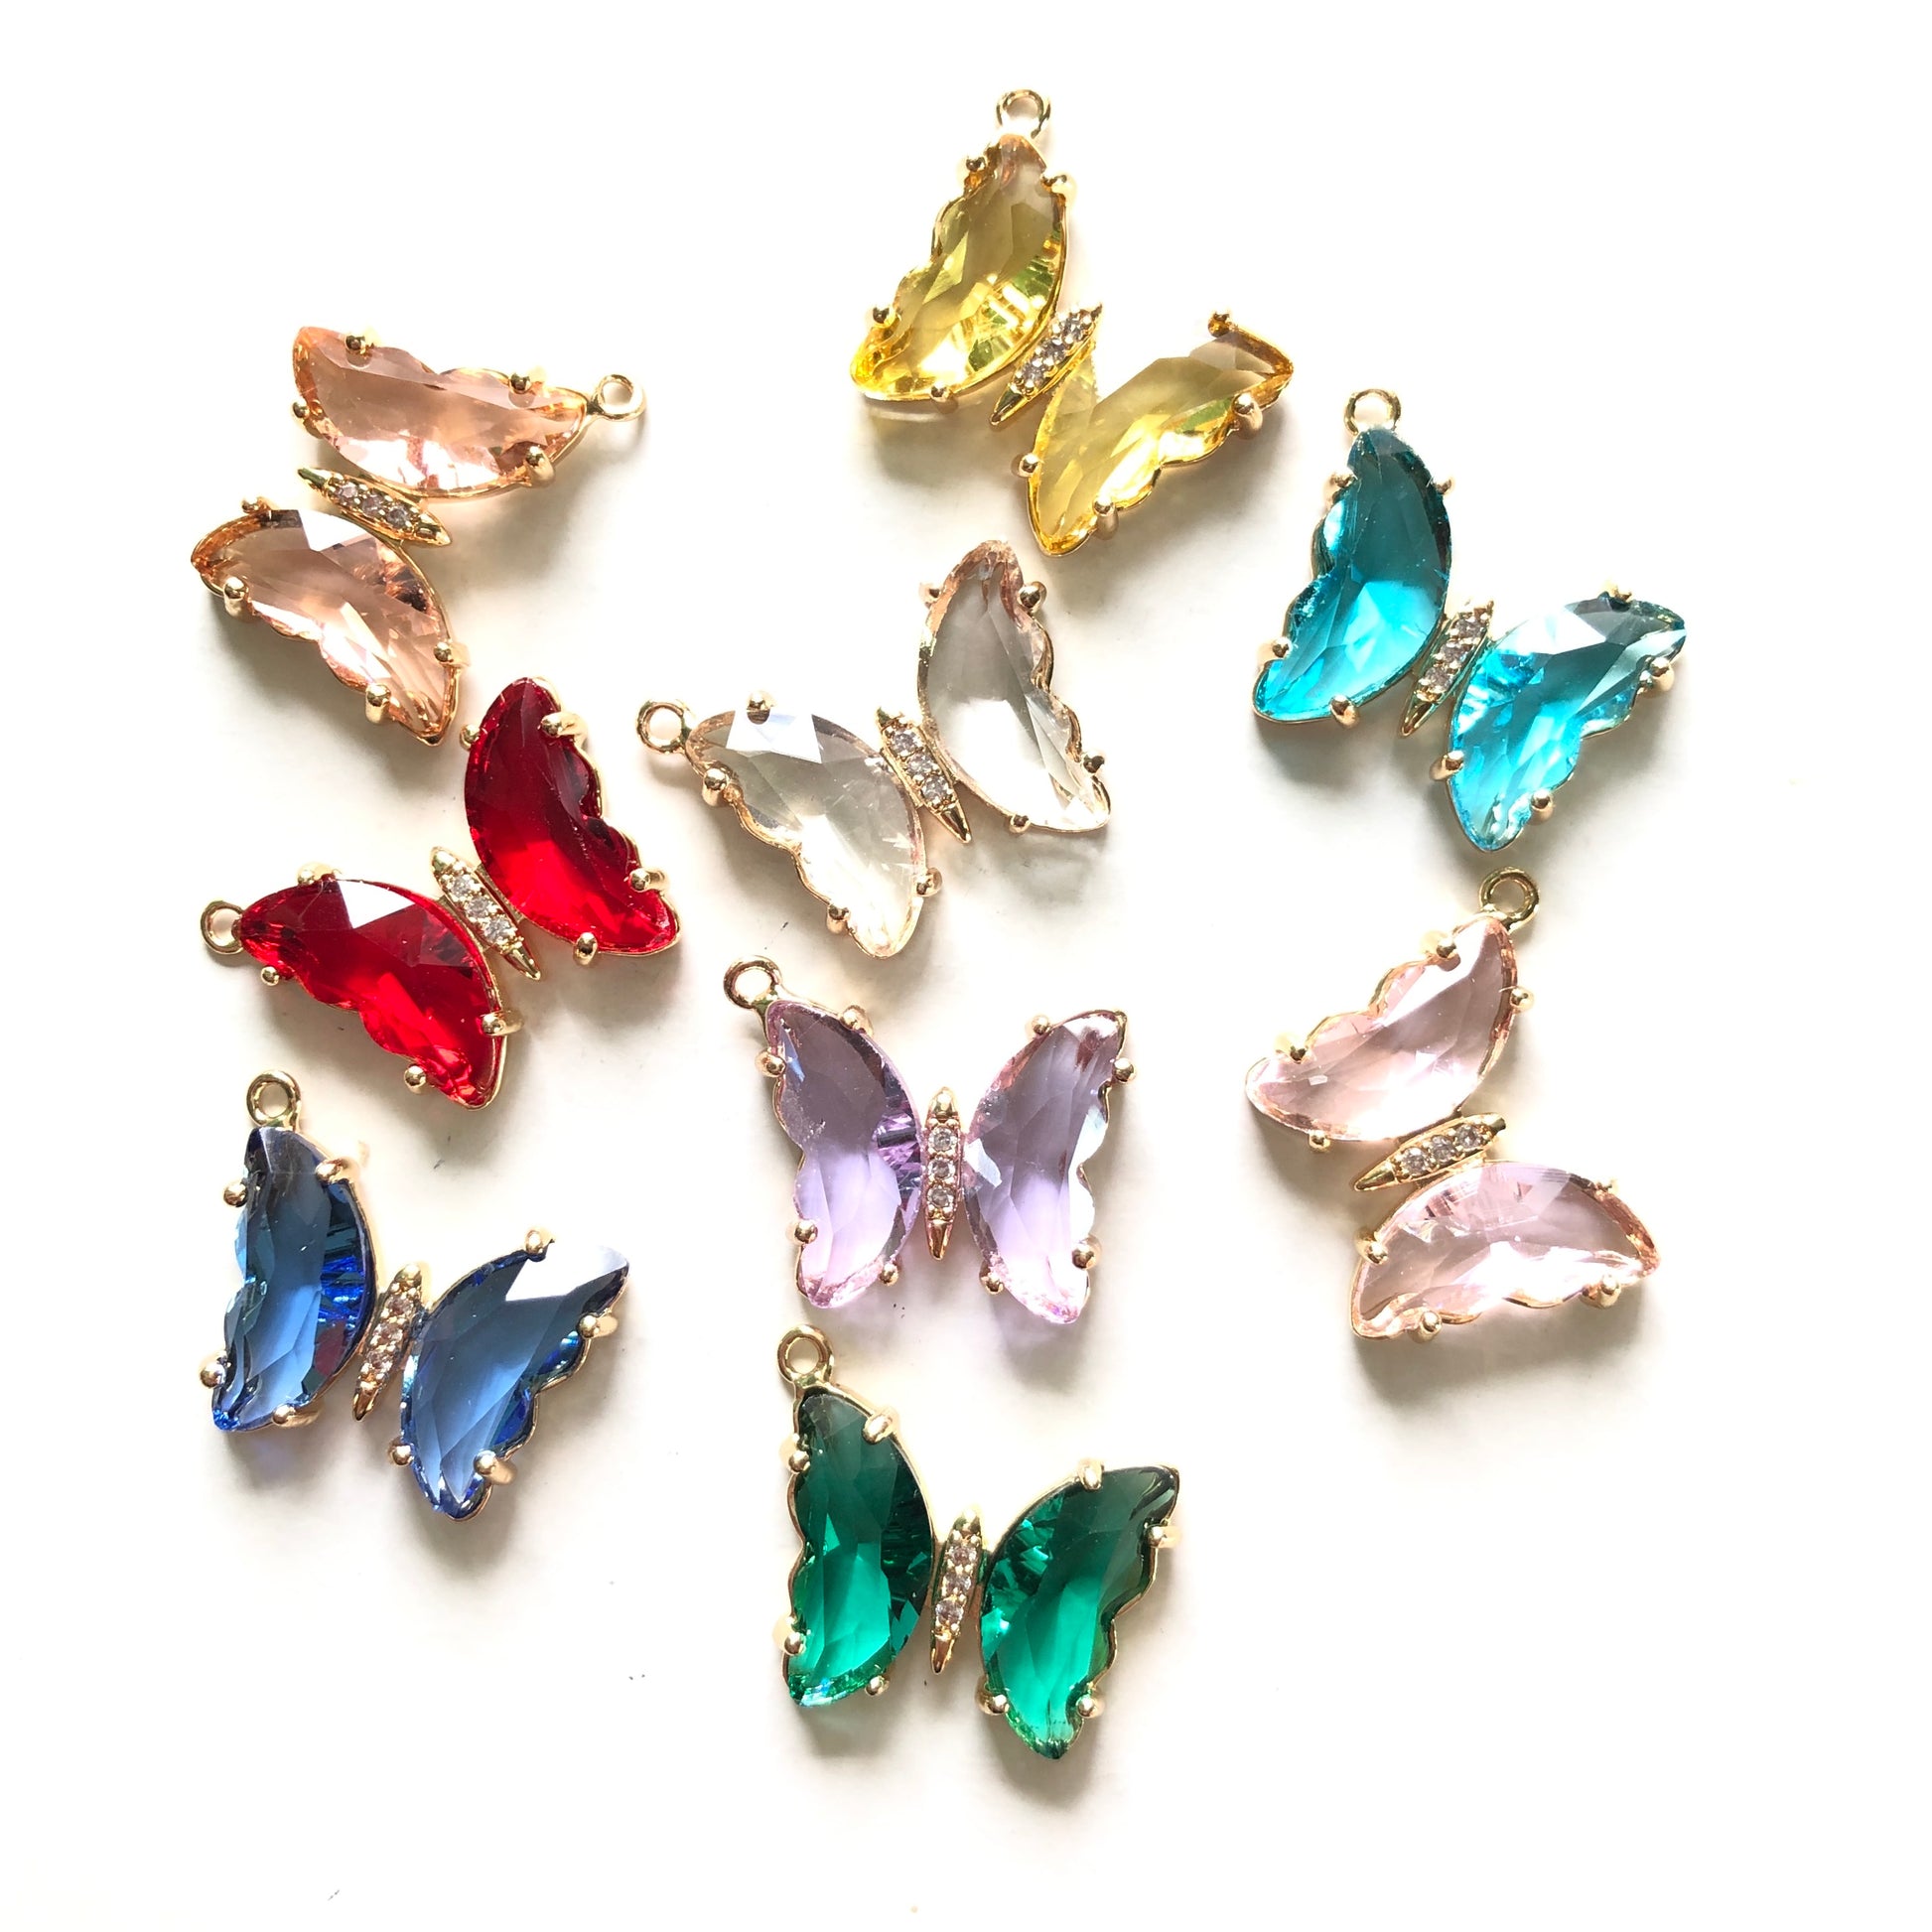 10pcs/lot 20*18mm Colorful Crystal Butterfly Charms CZ Paved Charms Butterflies Charms Beads Beyond